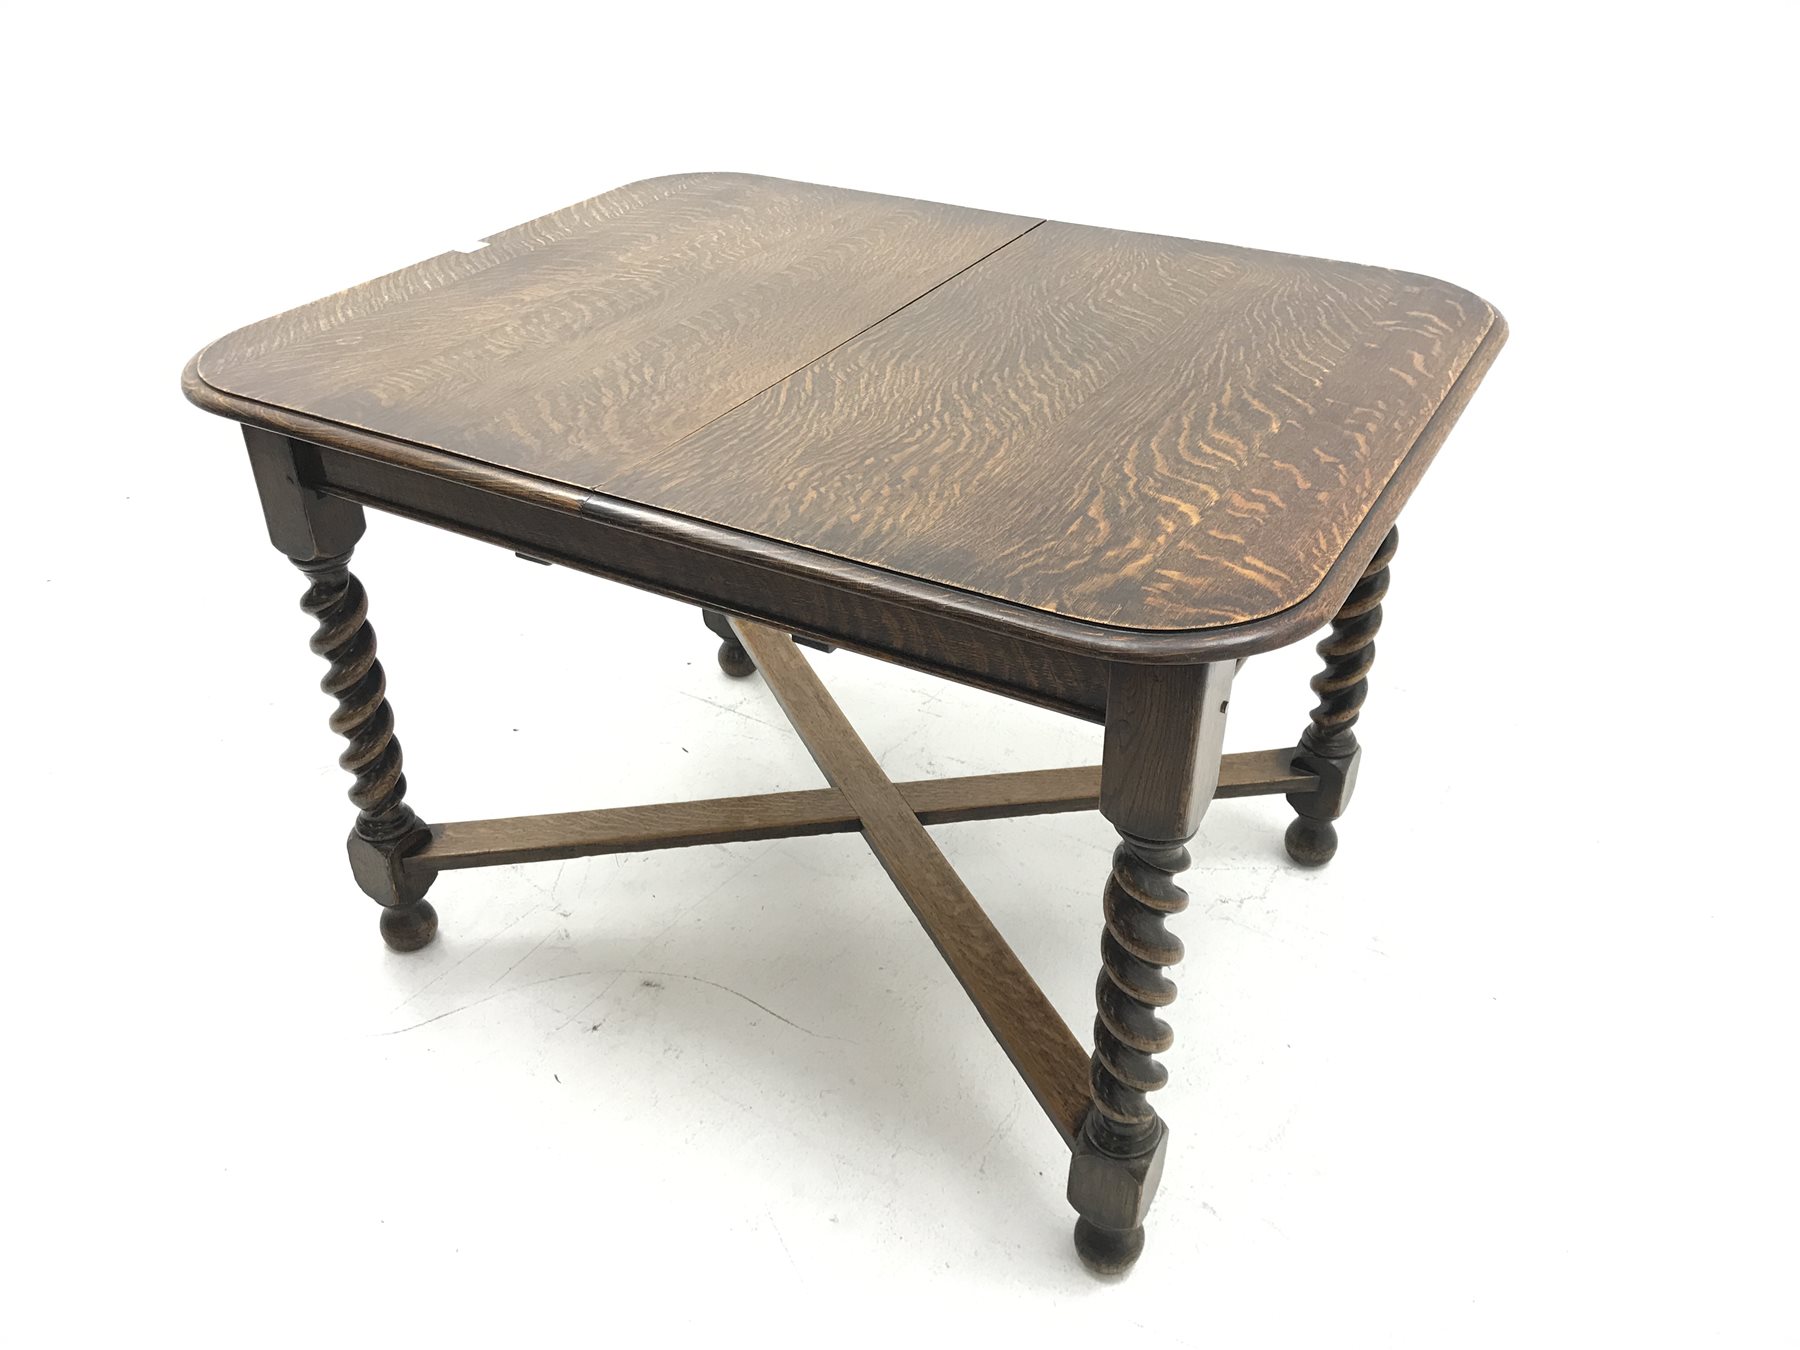 Early 20th century oak barley twist extending dining table with leaf, X shaped stretcher, curved end - Image 2 of 4